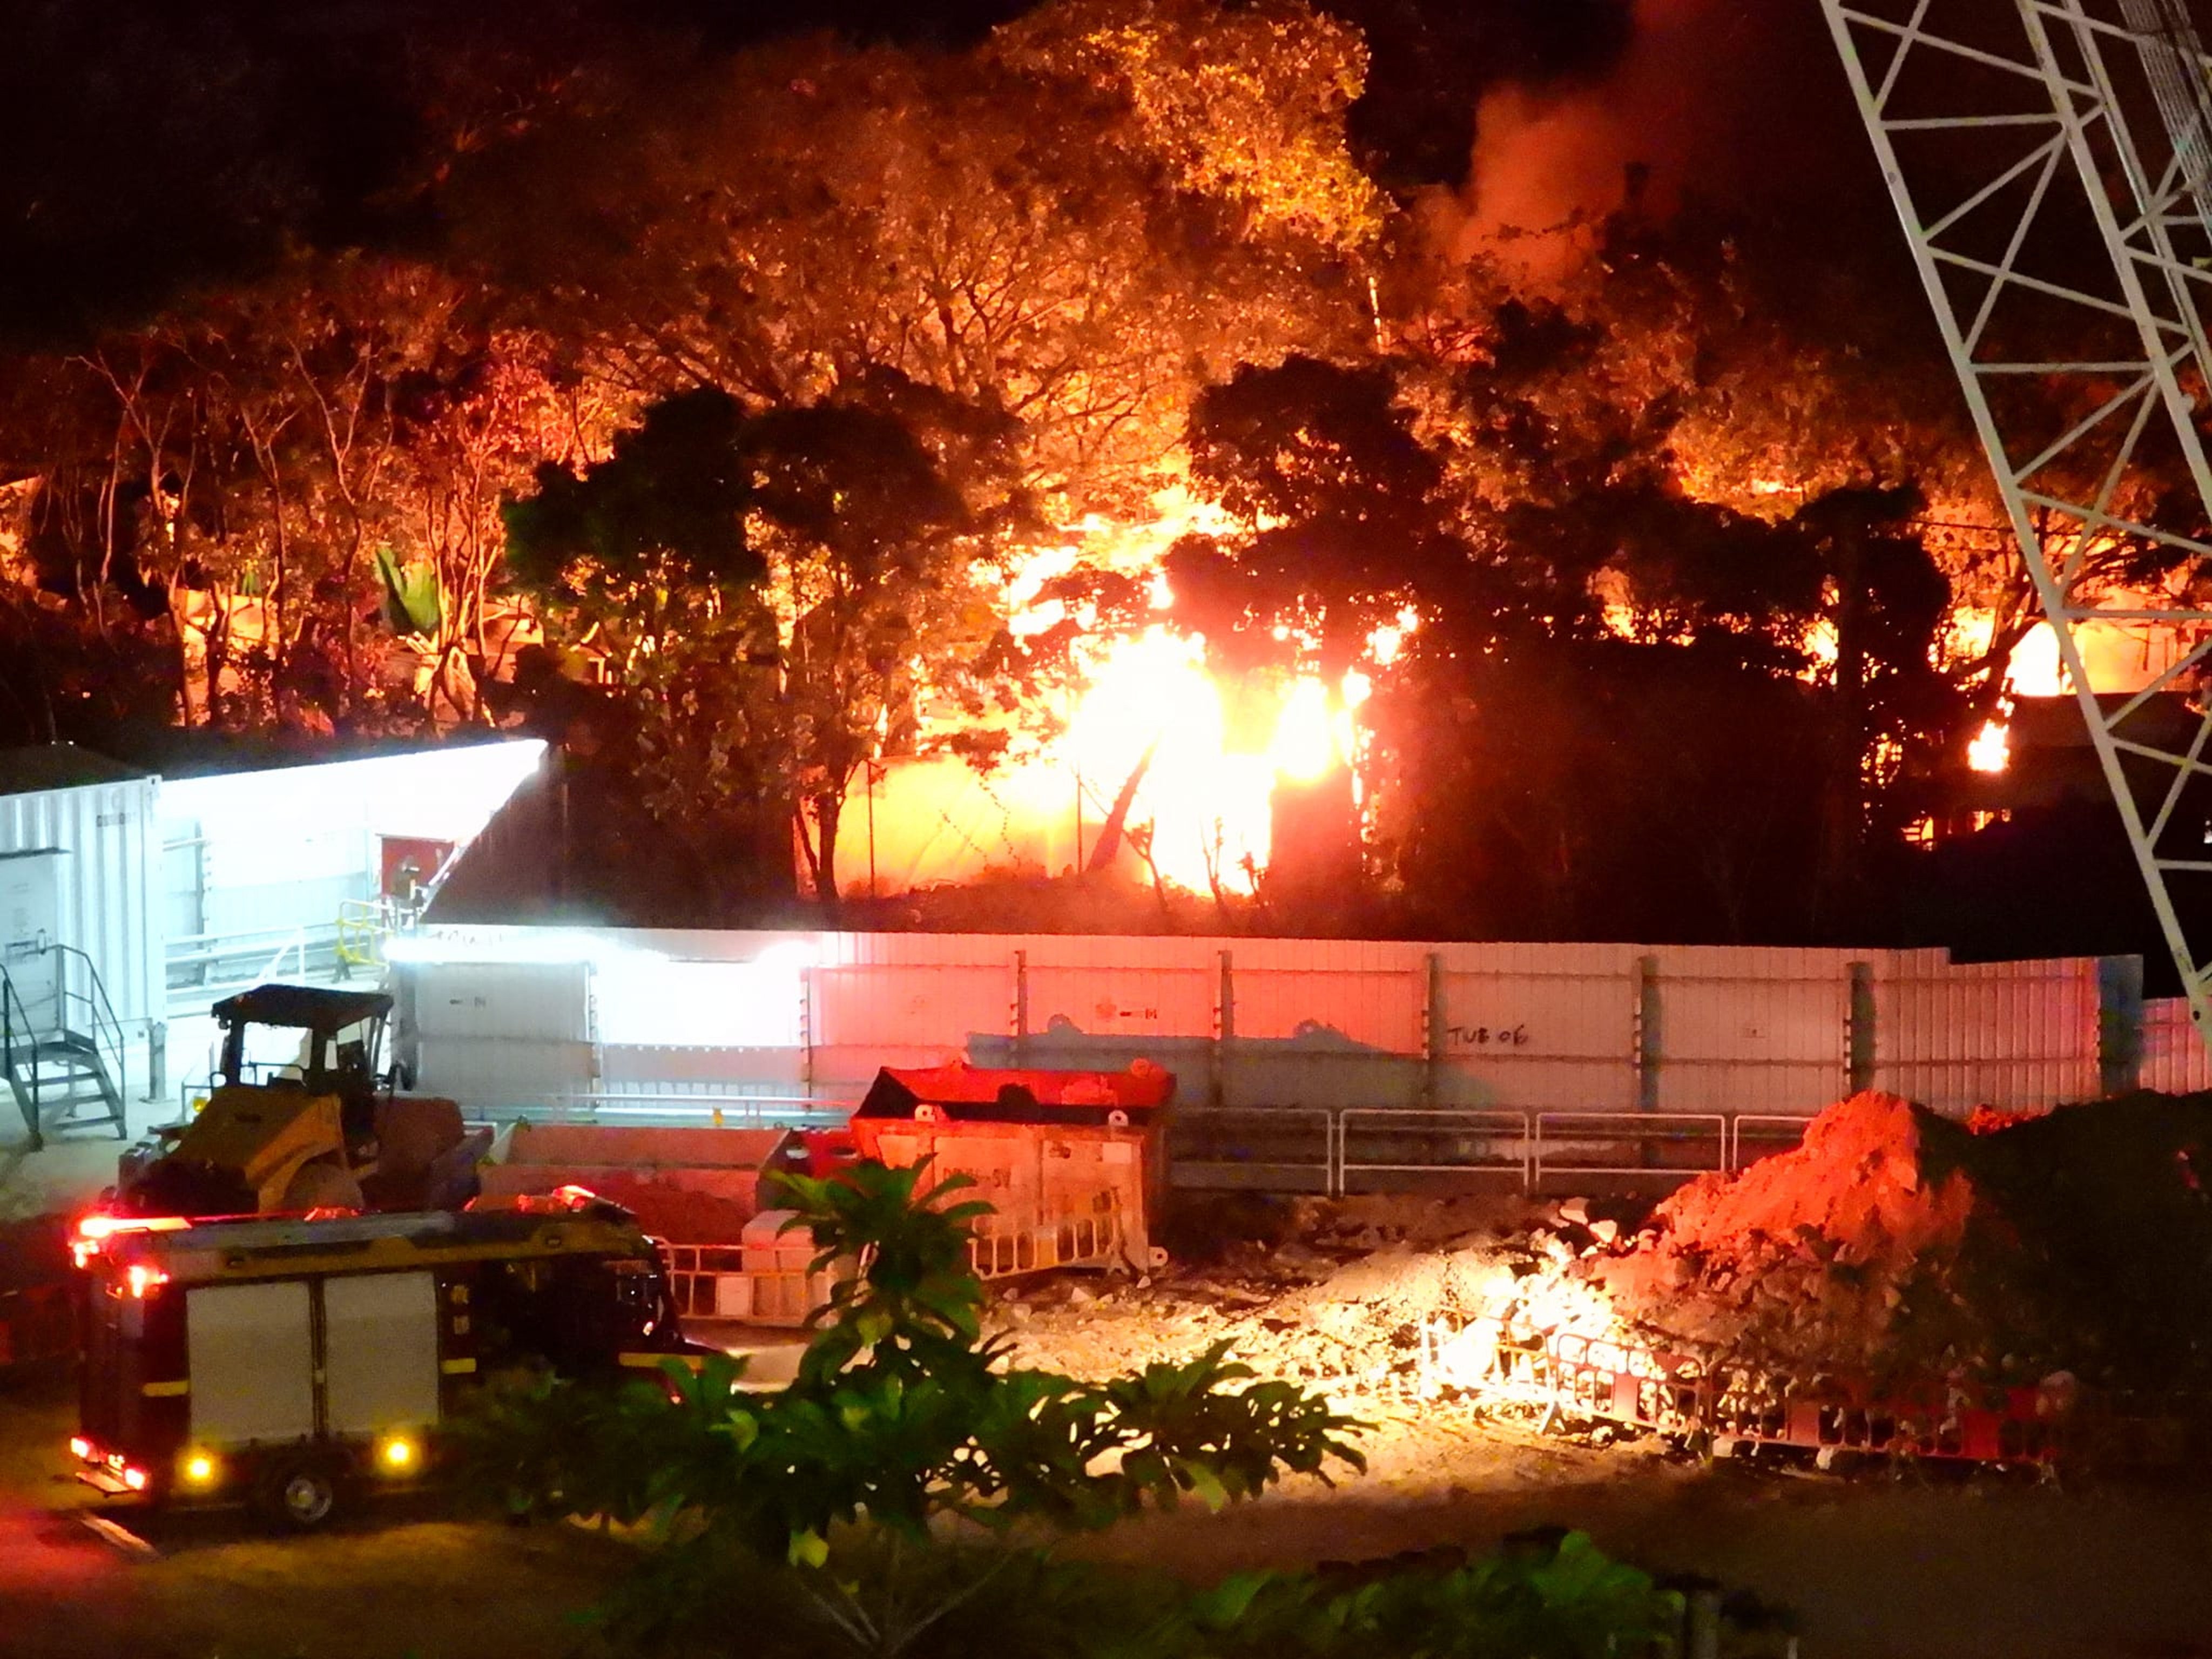 The fire at the kennel near a village house at 8 Yat Tung Street in Tung Chung. Photo: Facebook@Alex Sing